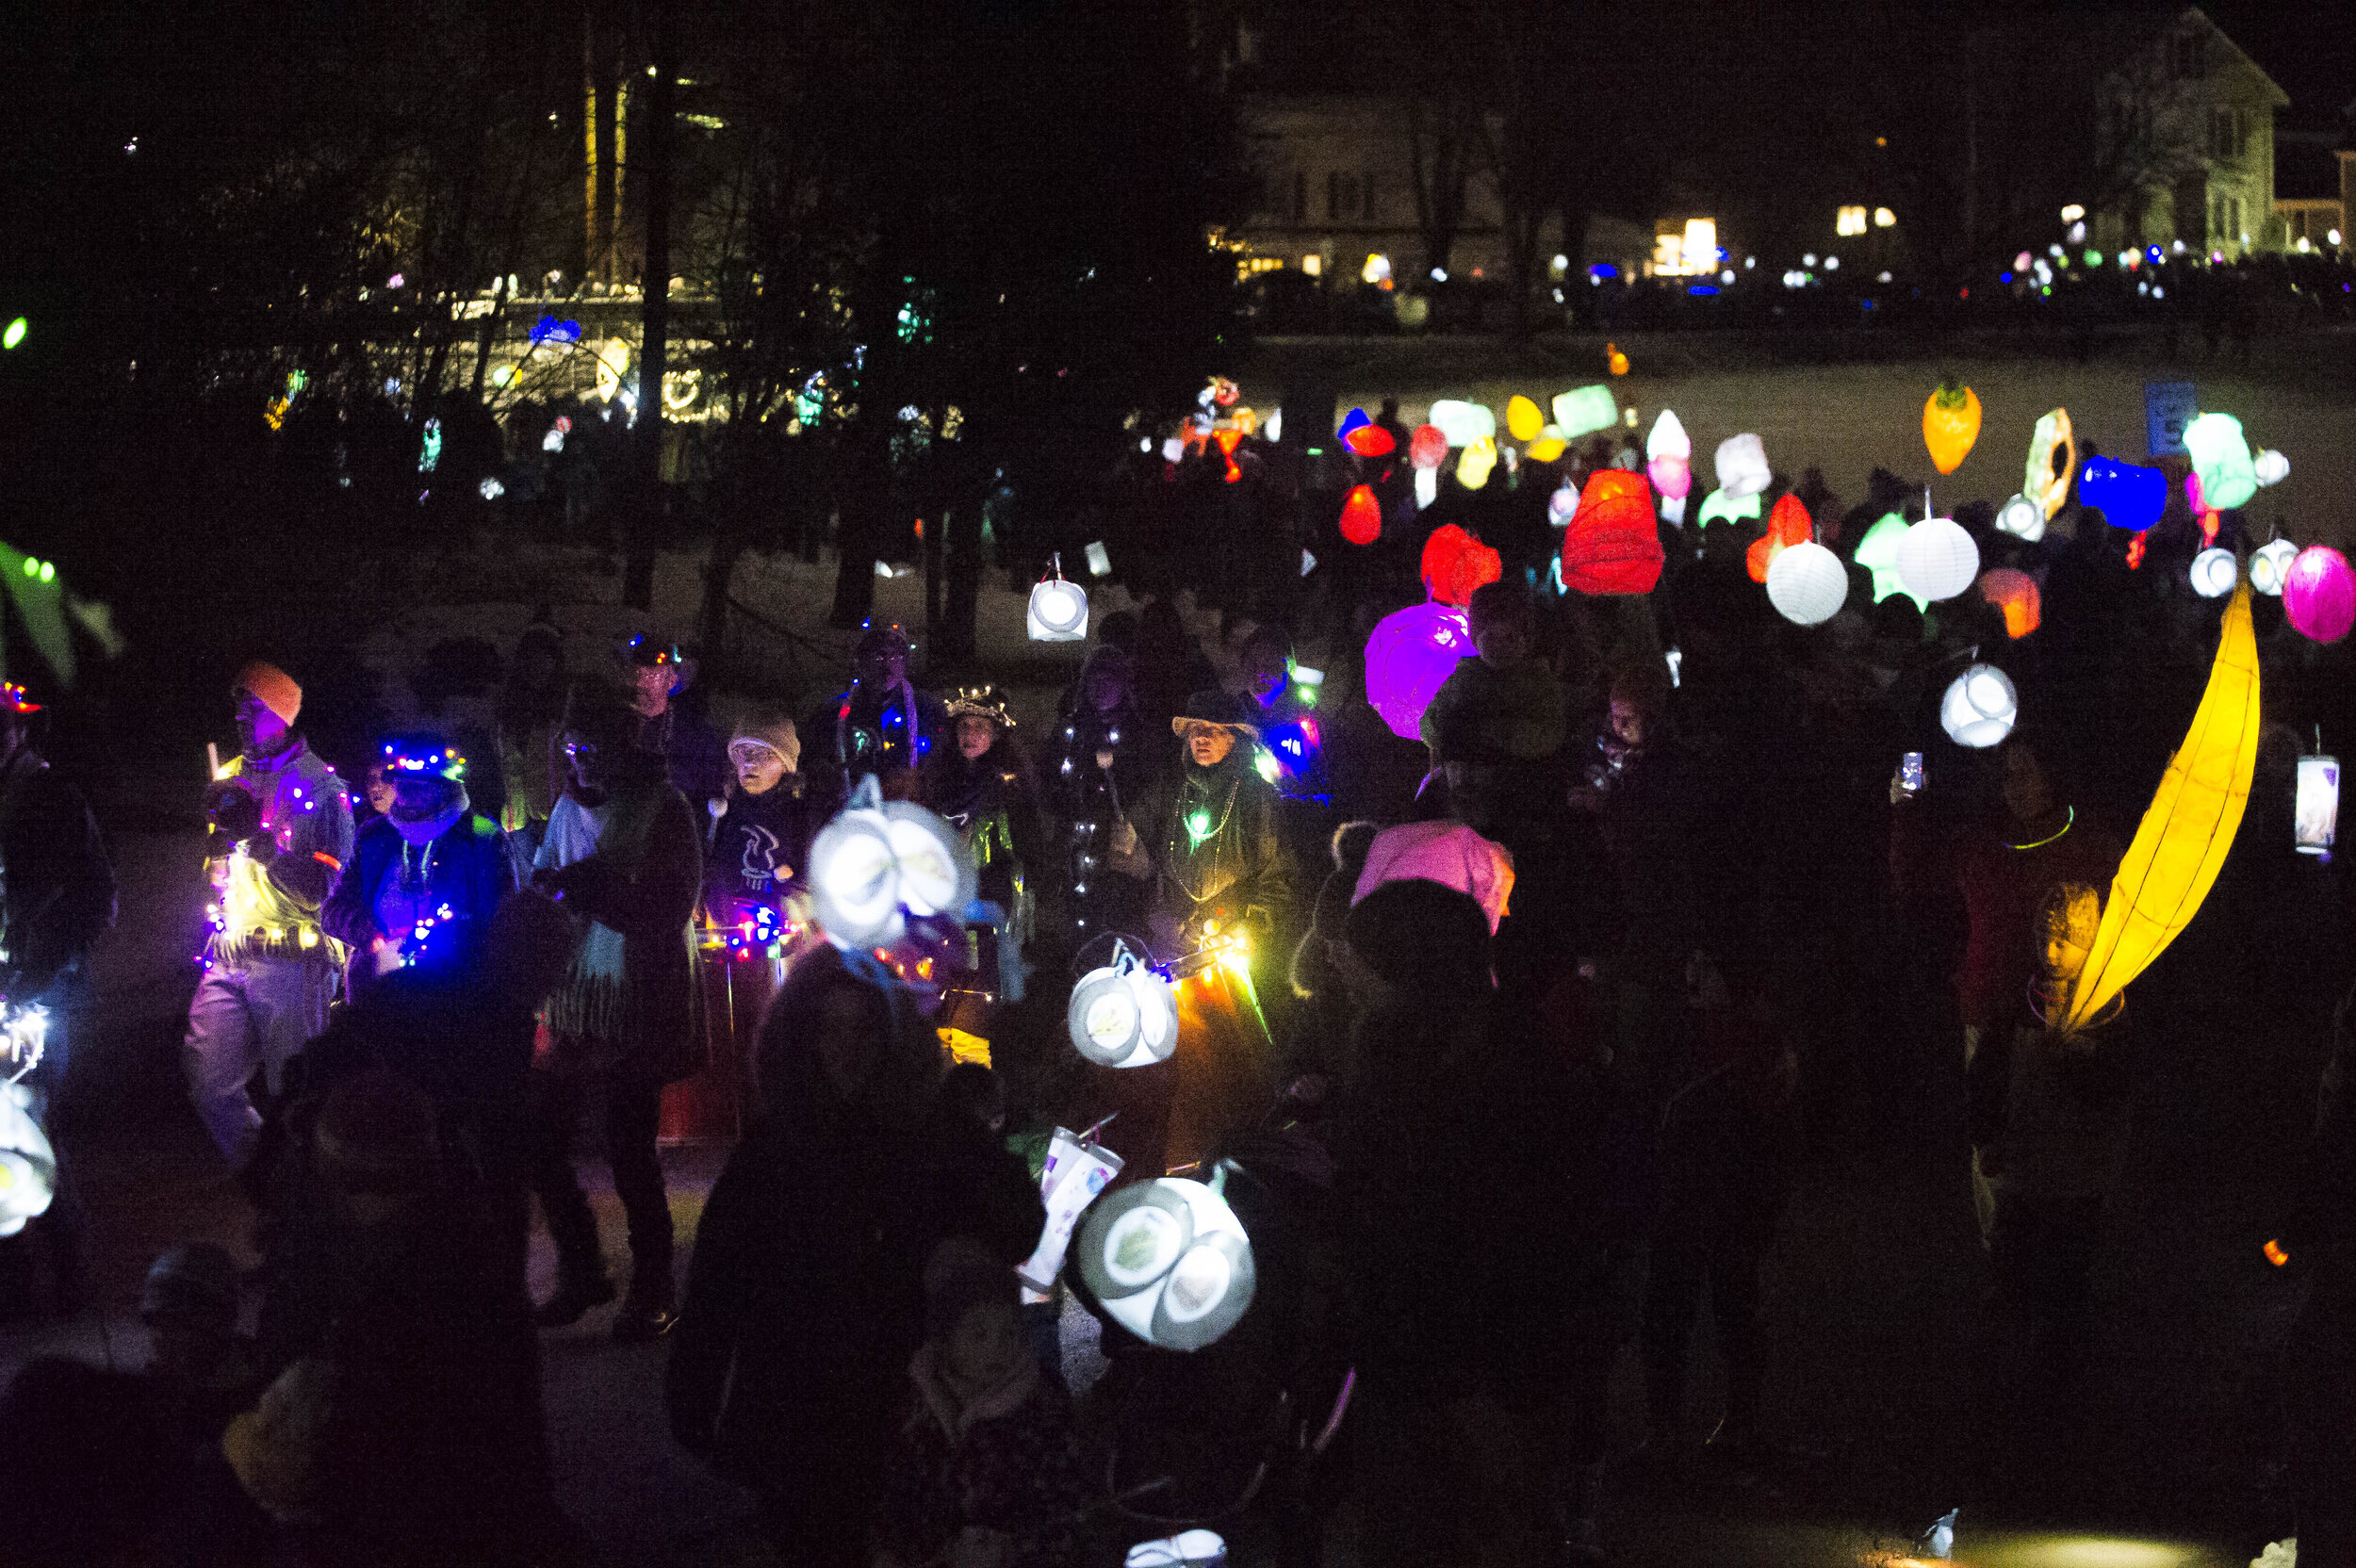  The annual River of Light festival processes into Dac Rowe Park in Waterbury, VT on Saturday, December 1st 2018.   